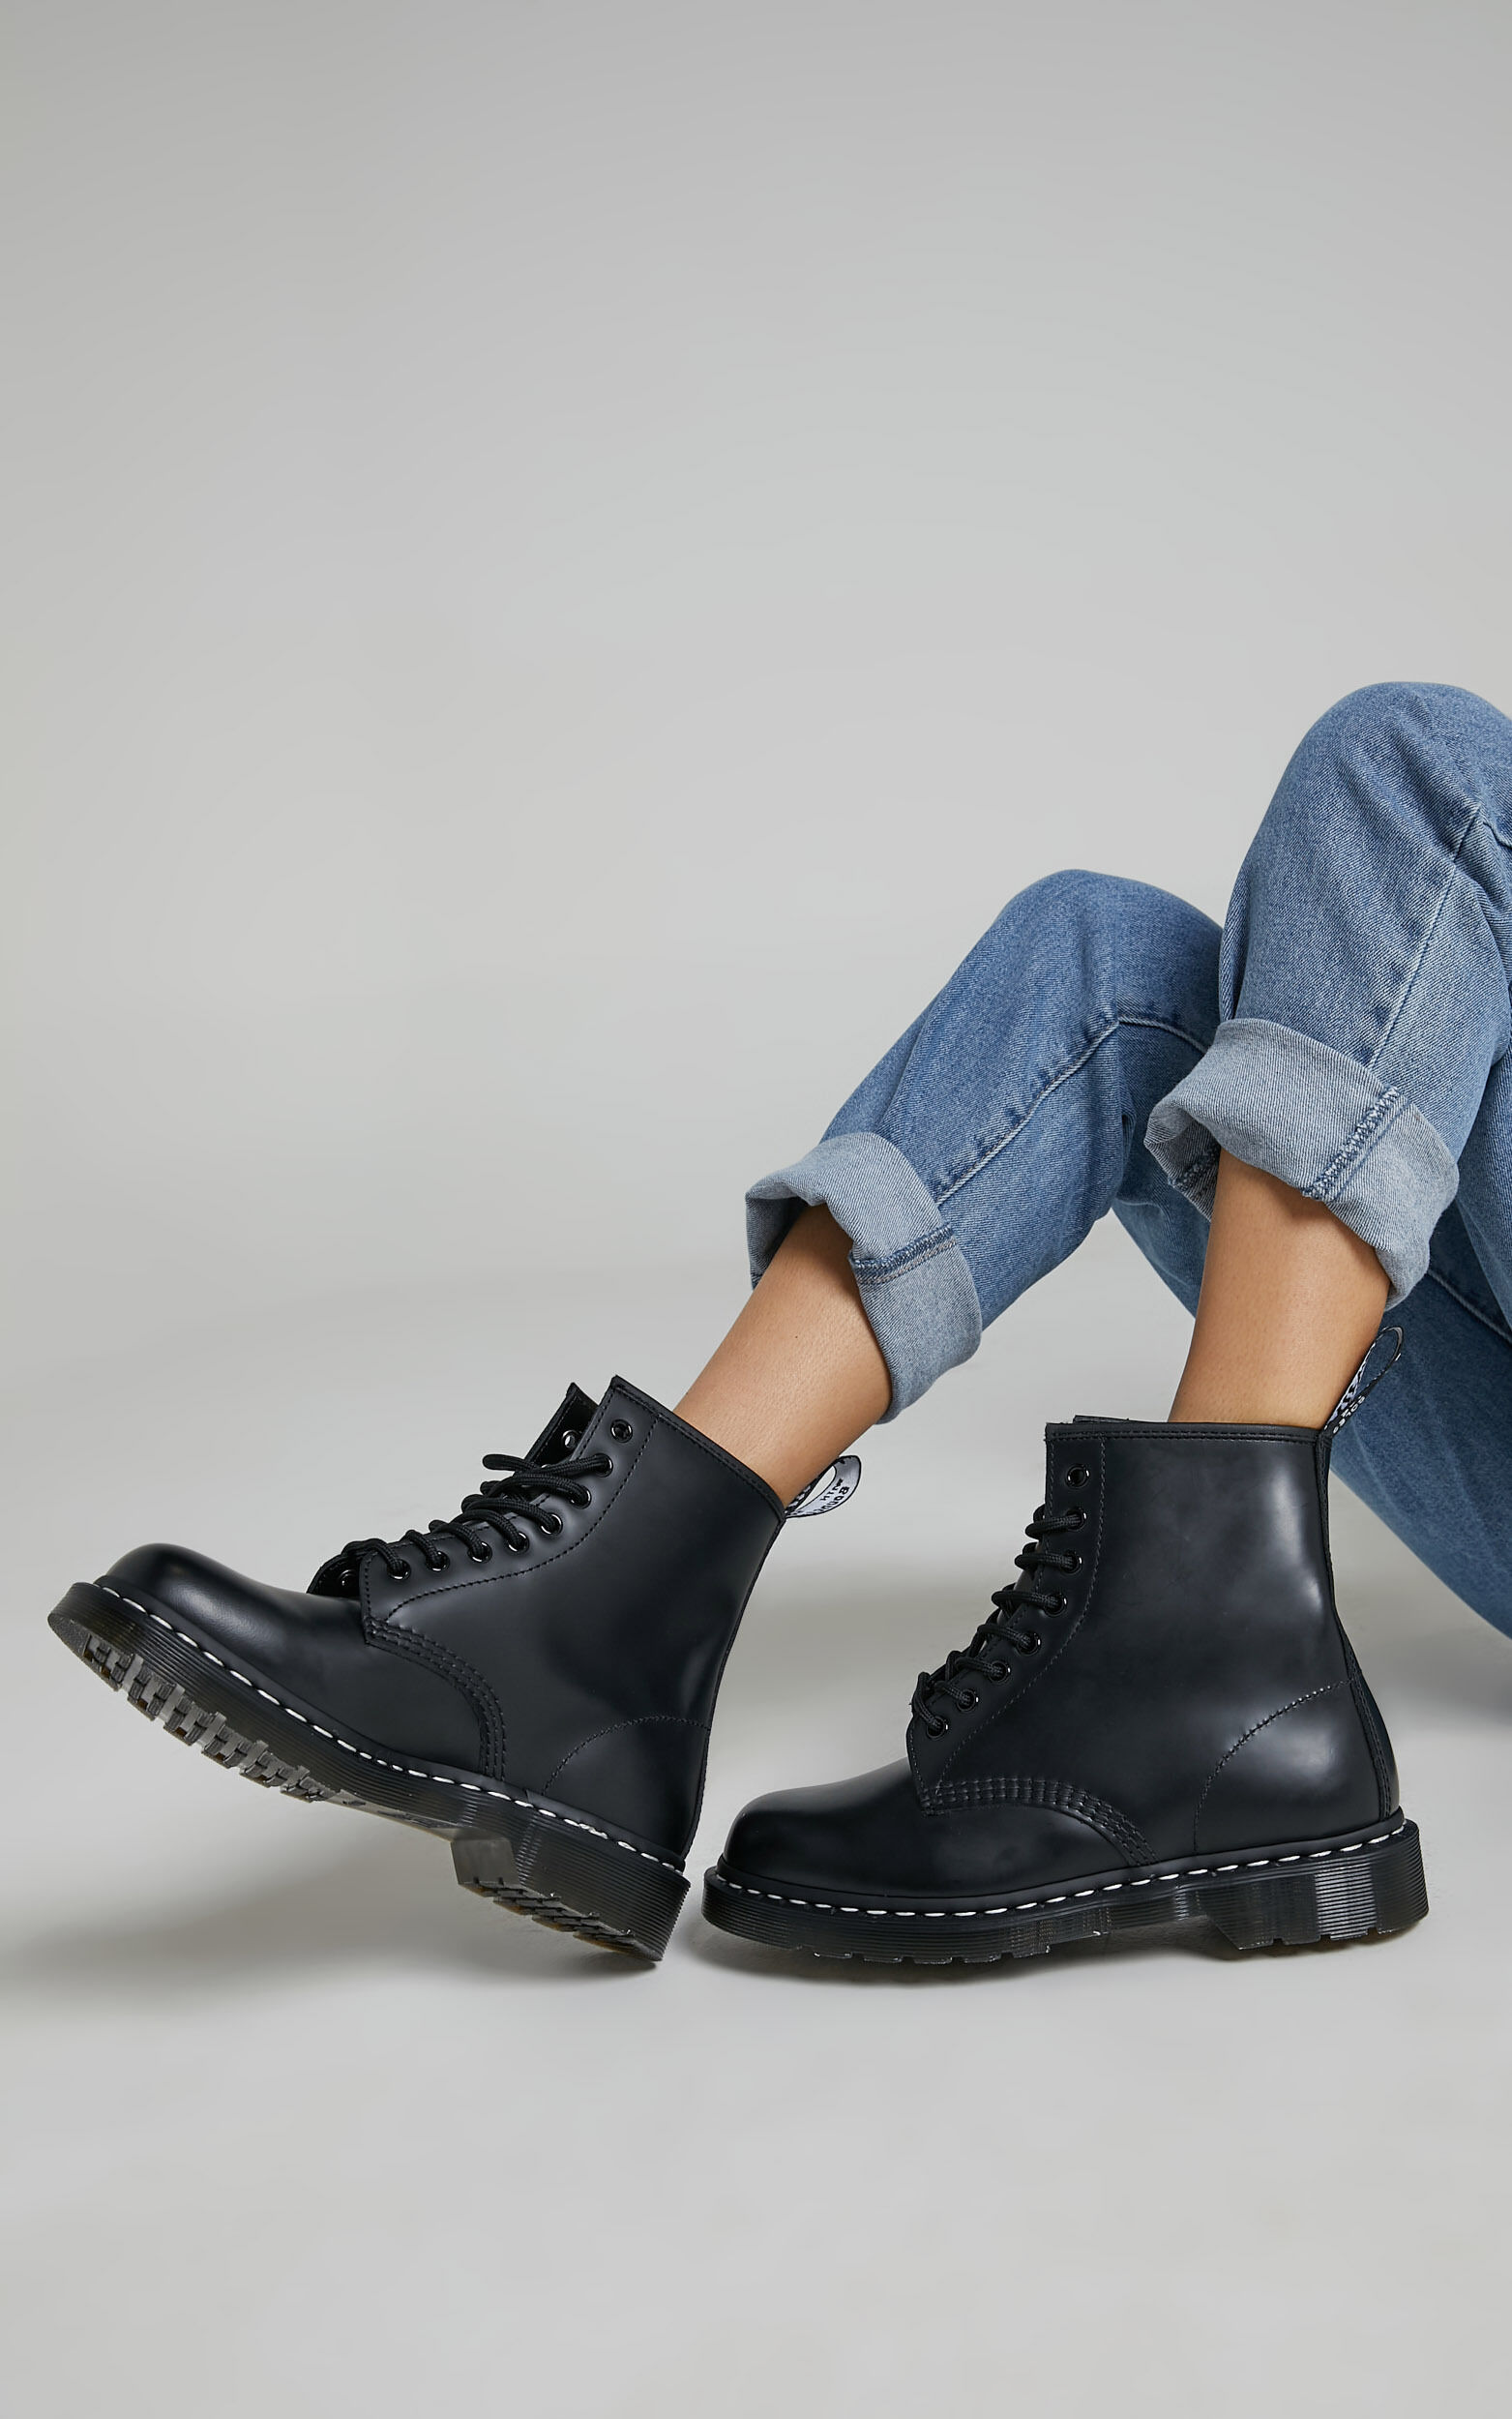 Dr. Martens - 1460 WS 8 Eye Boot in Black Smooth